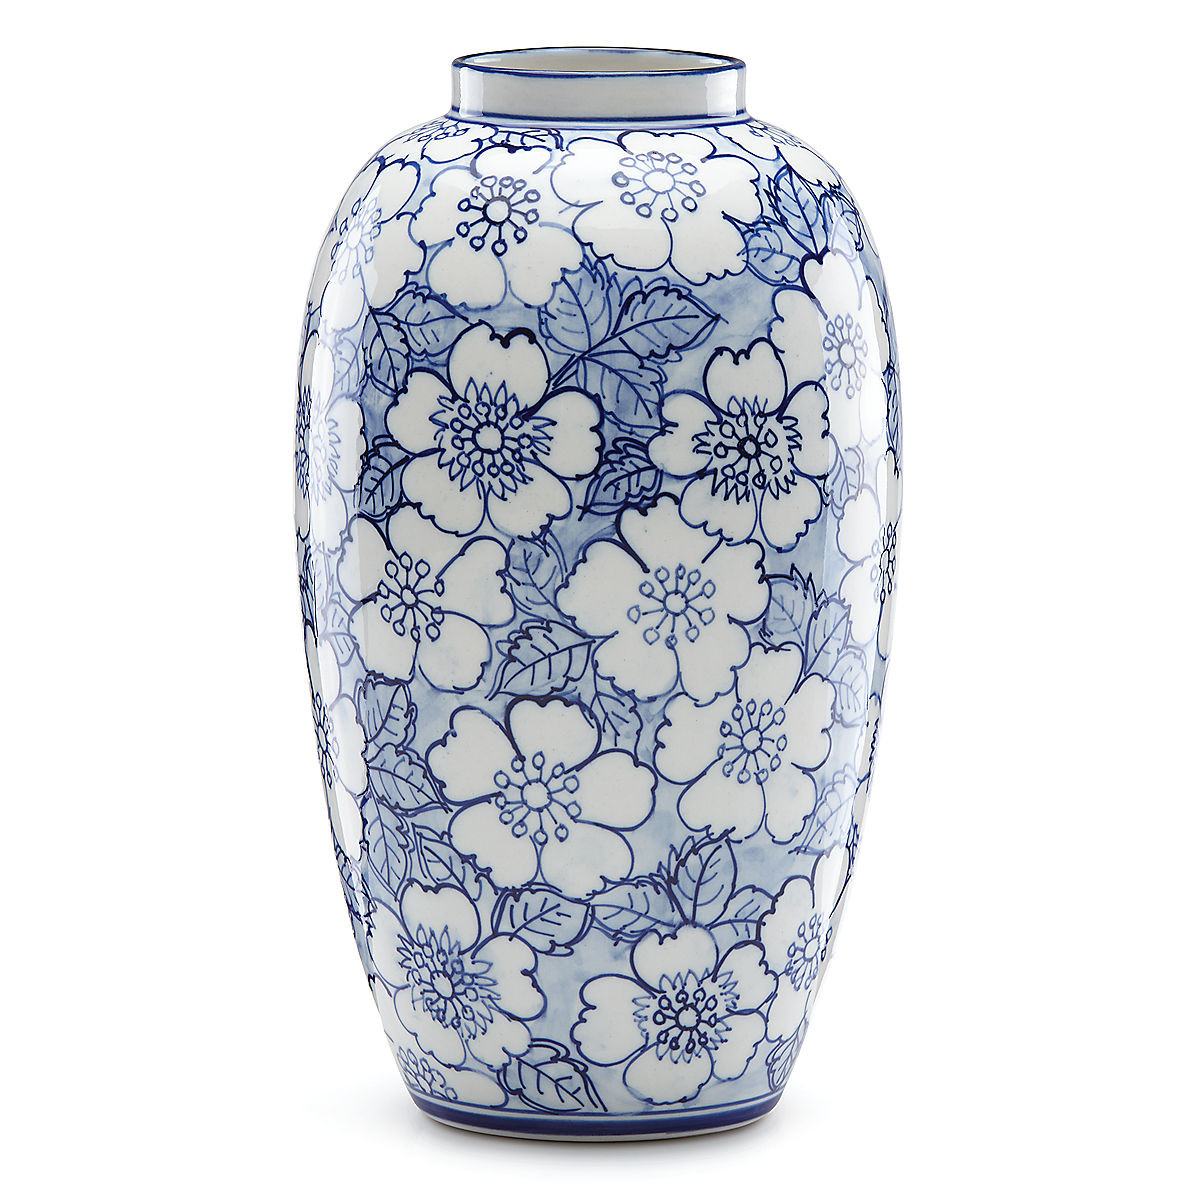 25 Fantastic Lenox Vase Patterns 2024 free download lenox vase patterns of painted indigoac284c2a2 floral tall vase wedding anniversary for painted indigo floral tall vase